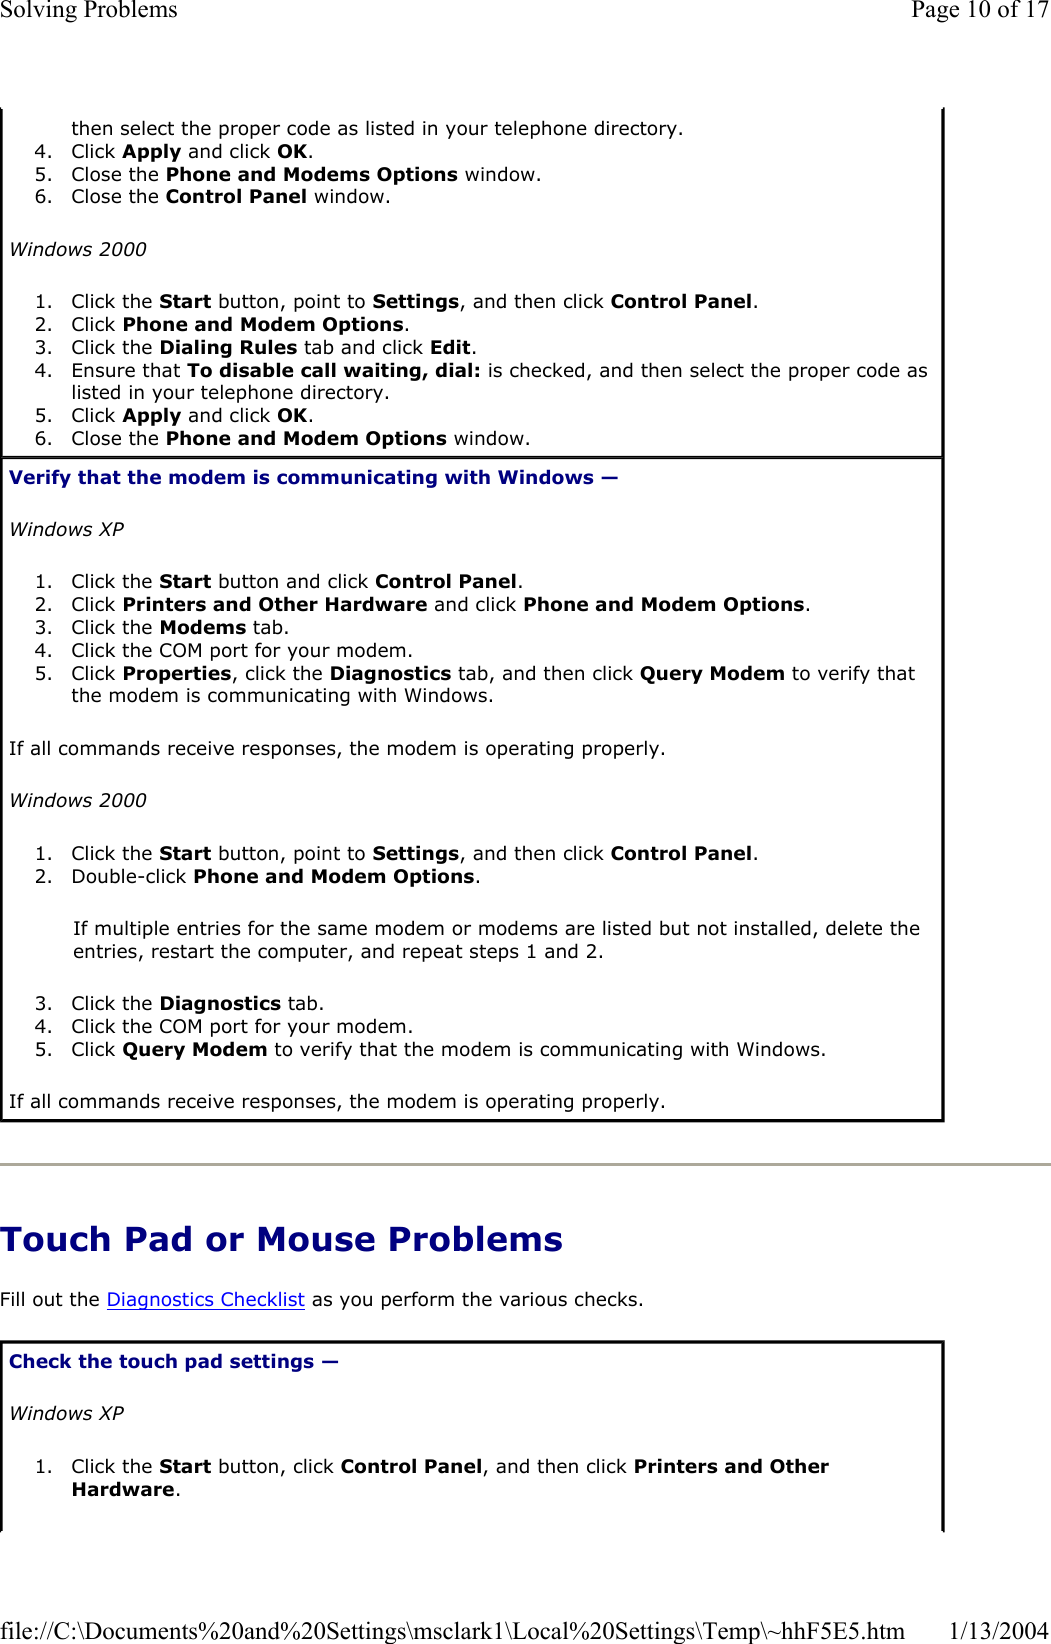 Touch Pad or Mouse Problems Fill out the Diagnostics Checklist as you perform the various checks. then select the proper code as listed in your telephone directory.  4. Click Apply and click OK.5. Close the Phone and Modems Options window.  6. Close the Control Panel window.  Windows 20001. Click the Start button, point to Settings, and then click Control Panel.2. Click Phone and Modem Options.3. Click the Dialing Rules tab and click Edit.4. Ensure that To disable call waiting, dial: is checked, and then select the proper code as listed in your telephone directory.  5. Click Apply and click OK.6. Close the Phone and Modem Options window.  Verify that the modem is communicating with Windows —Windows XP1. Click the Start button and click Control Panel.2. Click Printers and Other Hardware and click Phone and Modem Options.3. Click the Modems tab.  4. Click the COM port for your modem.  5. Click Properties, click the Diagnostics tab, and then click Query Modem to verify that the modem is communicating with Windows.  If all commands receive responses, the modem is operating properly. Windows 20001. Click the Start button, point to Settings, and then click Control Panel.2. Double-click Phone and Modem Options.If multiple entries for the same modem or modems are listed but not installed, delete the entries, restart the computer, and repeat steps 1 and 2. 3. Click the Diagnostics tab.  4. Click the COM port for your modem.  5. Click Query Modem to verify that the modem is communicating with Windows.  If all commands receive responses, the modem is operating properly. Check the touch pad settings —Windows XP1. Click the Start button, click Control Panel, and then click Printers and Other Hardware.Page 10 of 17Solving Problems1/13/2004file://C:\Documents%20and%20Settings\msclark1\Local%20Settings\Temp\~hhF5E5.htm